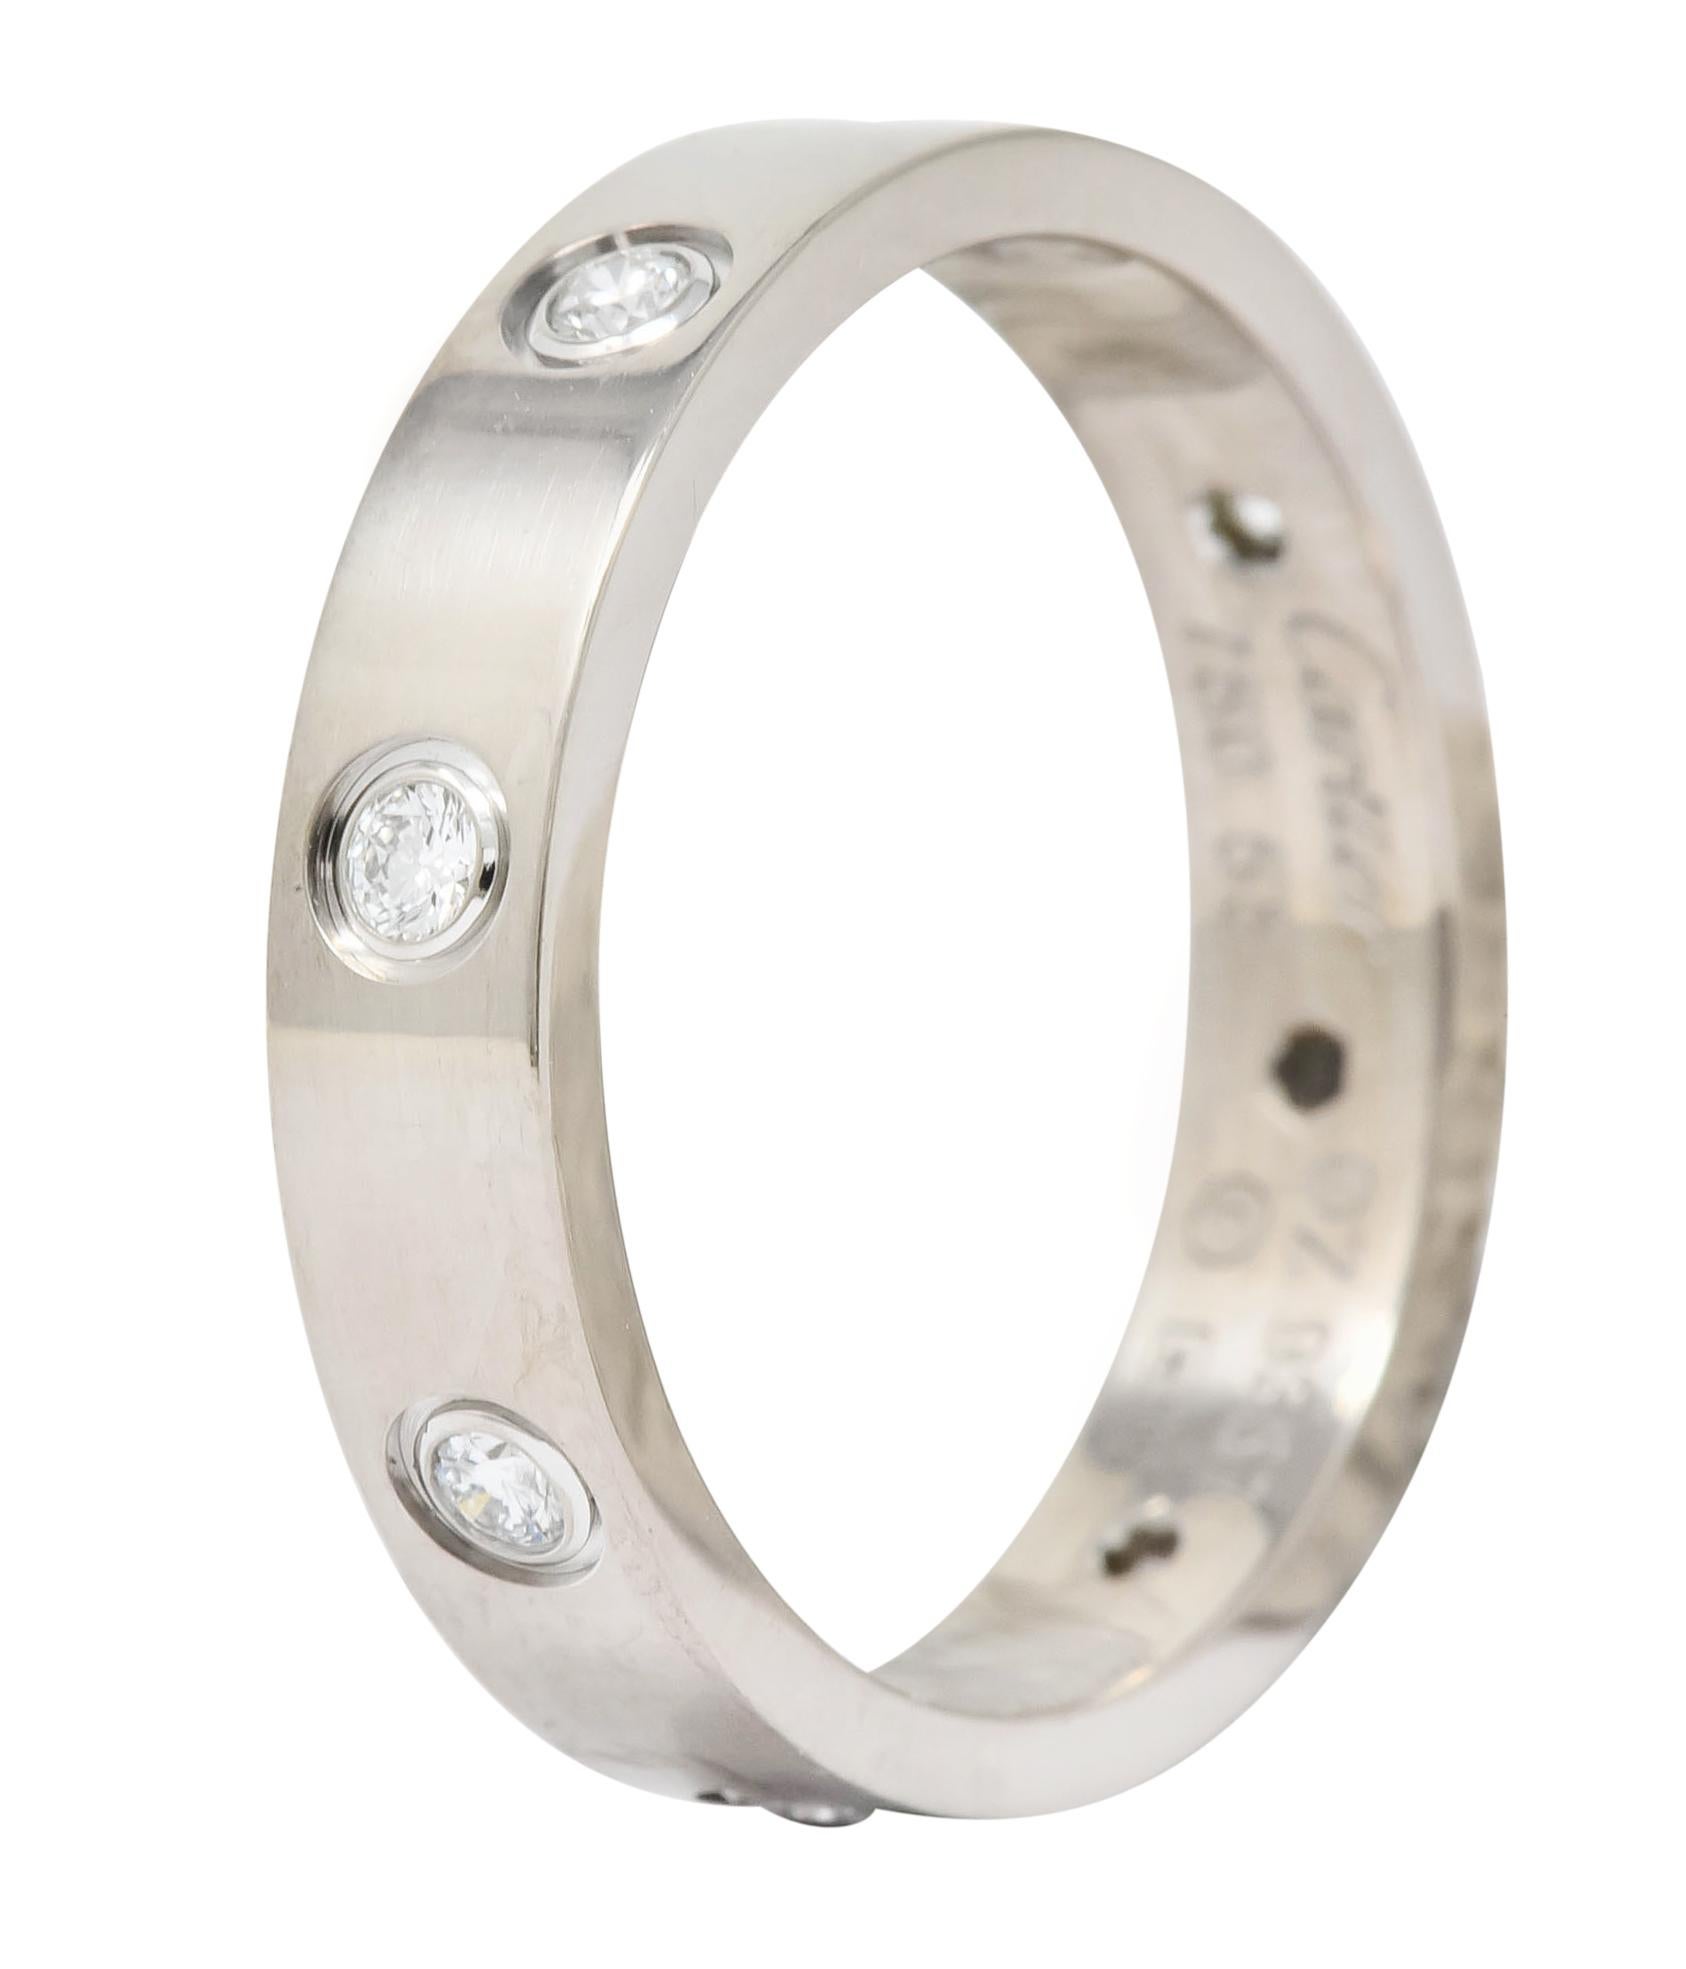 Band style ring flush set throughout with eight round brilliant cut diamonds weighing approximately 0.25 carat

Diamonds are eye-clean, white in color, and evenly spaced

From the infamous Love collection

Fully signed Cartier with Italian assay